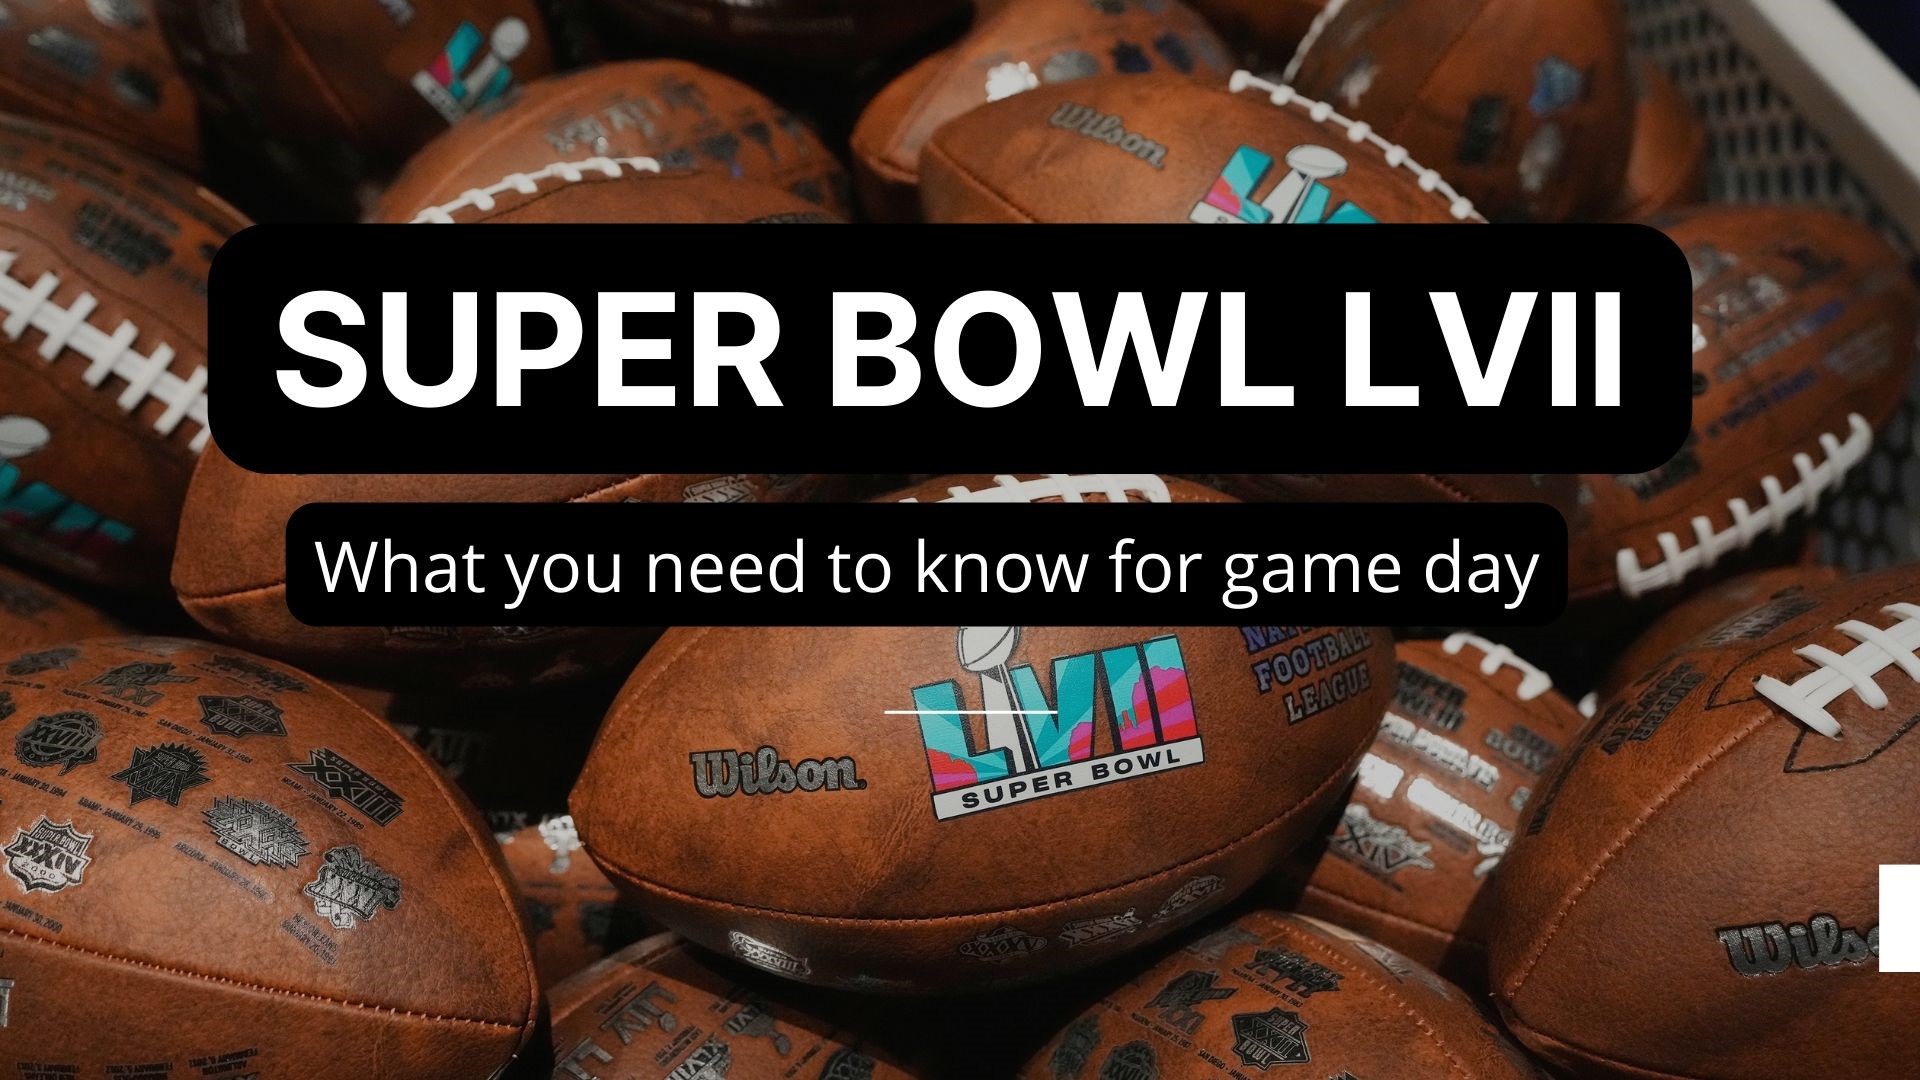 What you need to know for Super Bowl LVII from stats for the Eagles and the Chiefs to the performances expected and more.